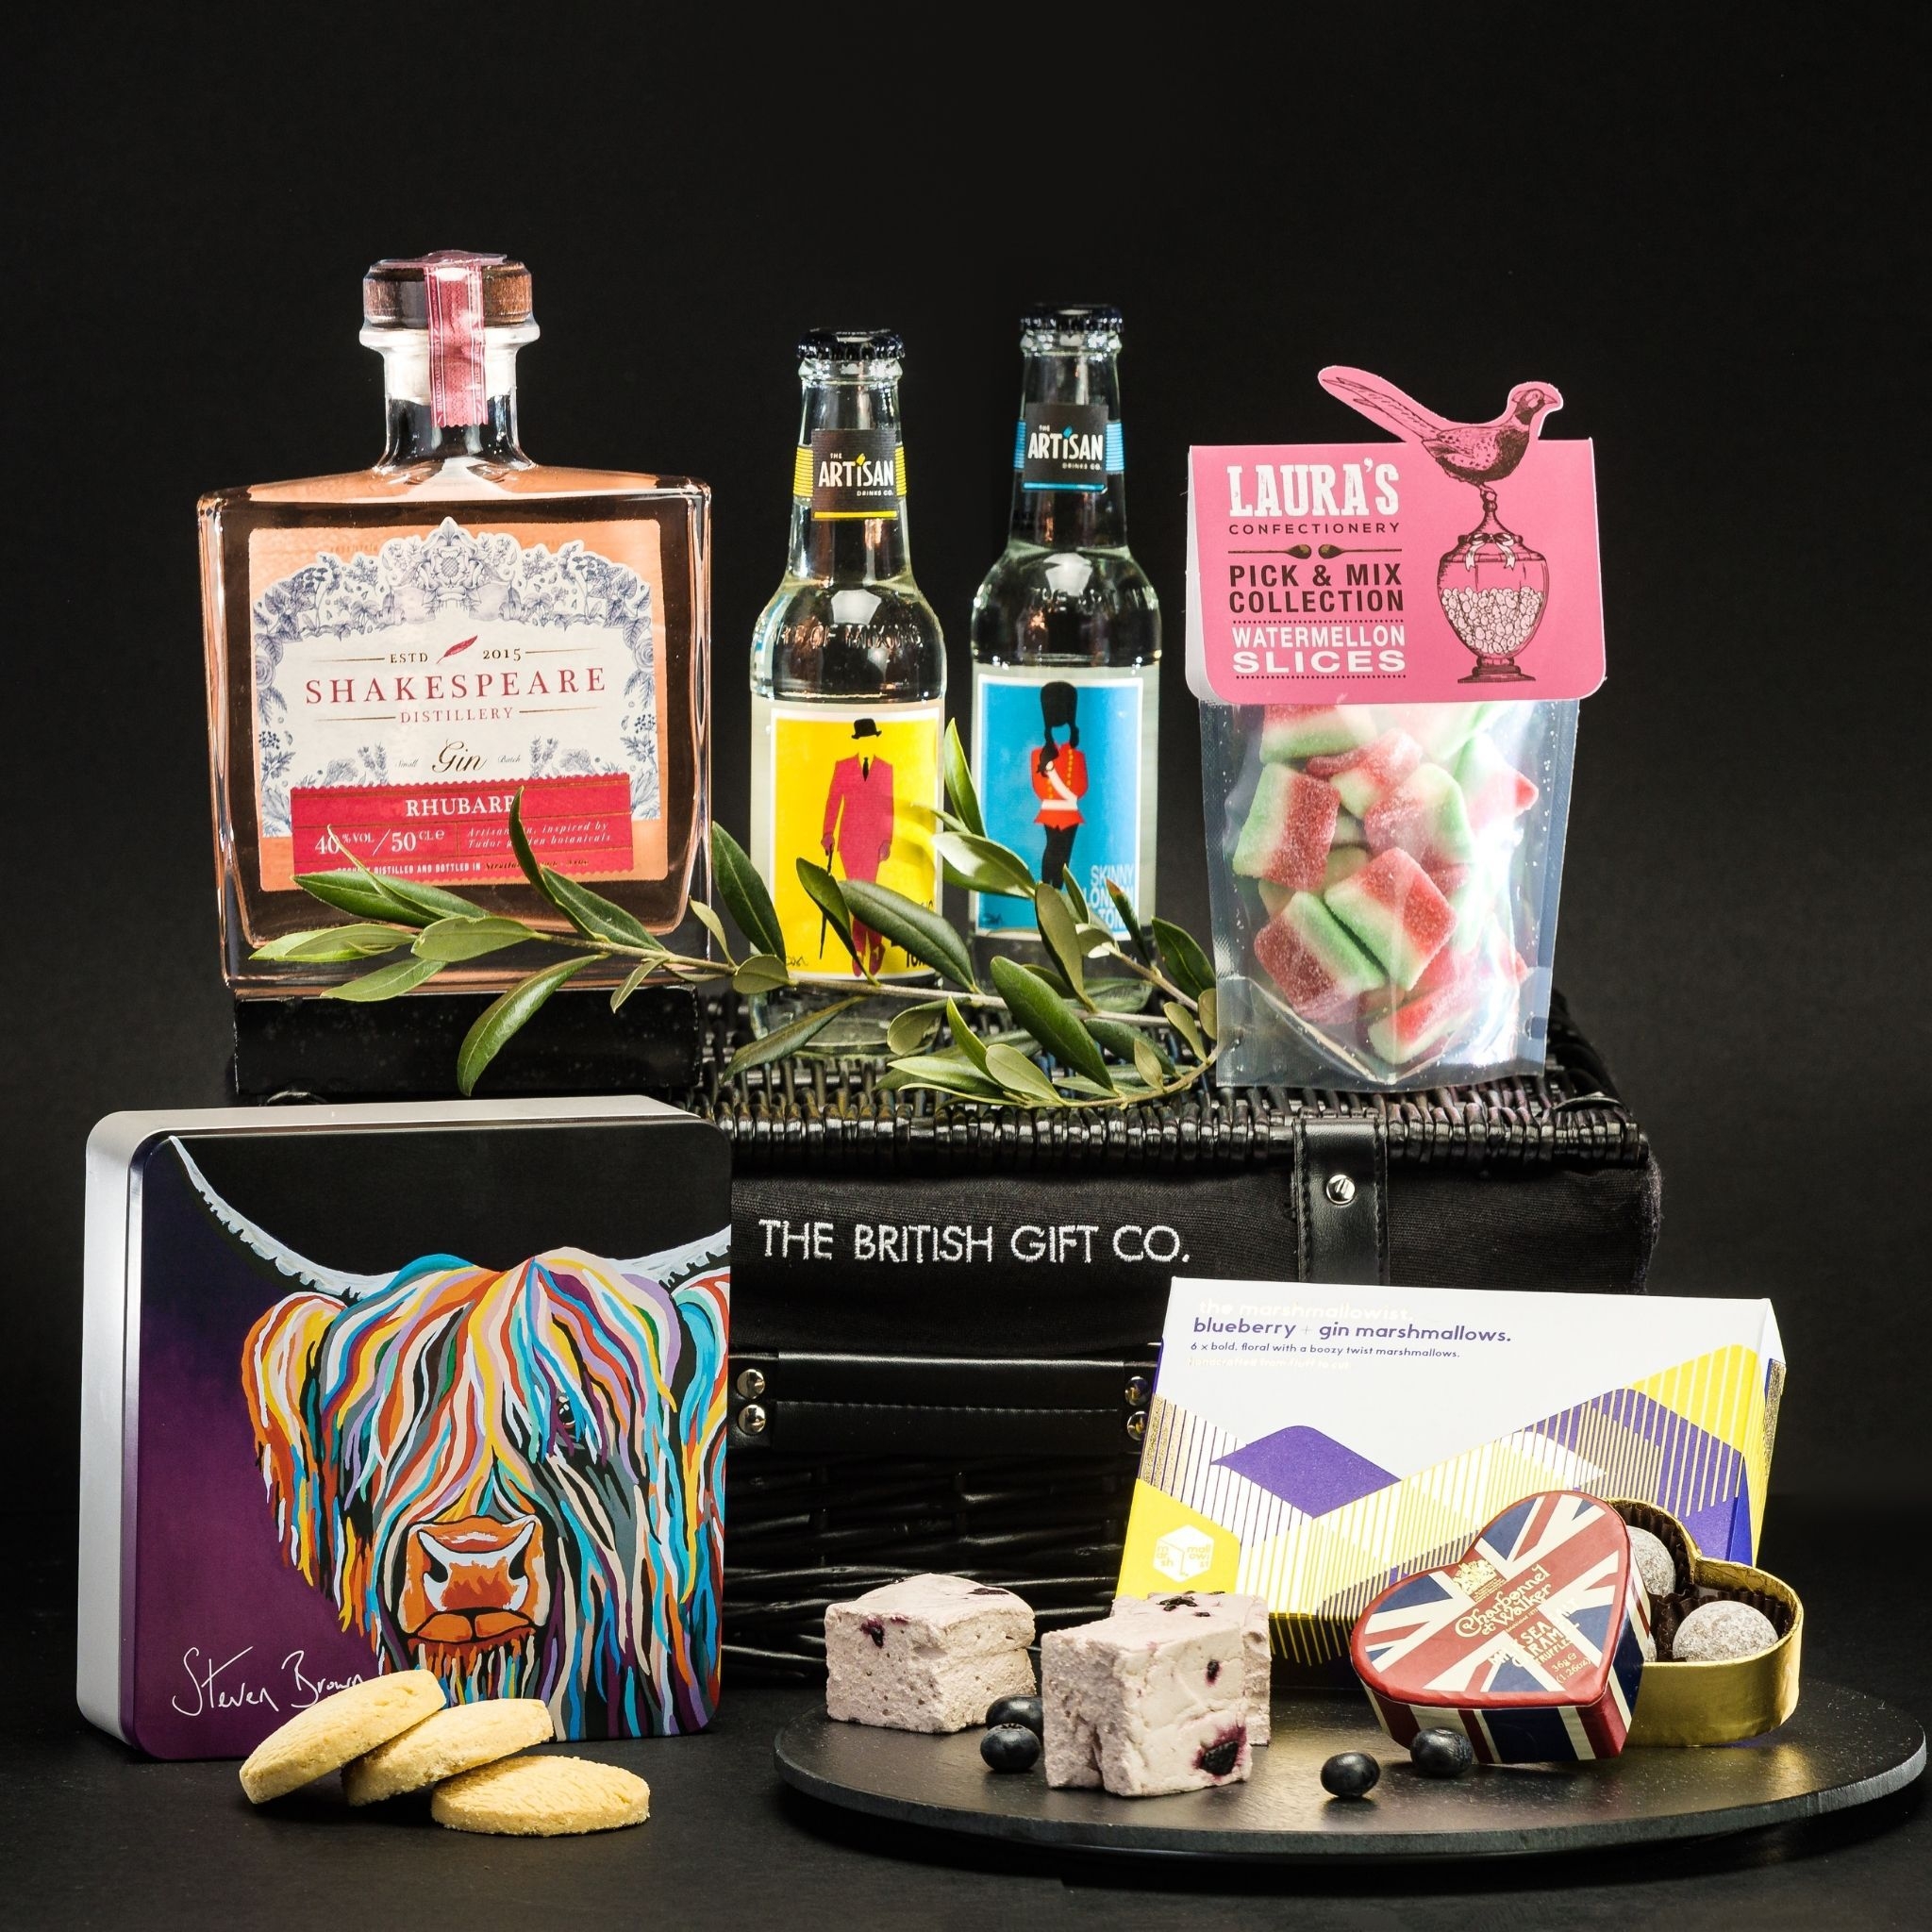 Rhubarb Gin & Tonic Gift Set with Sweets | Gifts for Gin Lovers – The British Gift Co.